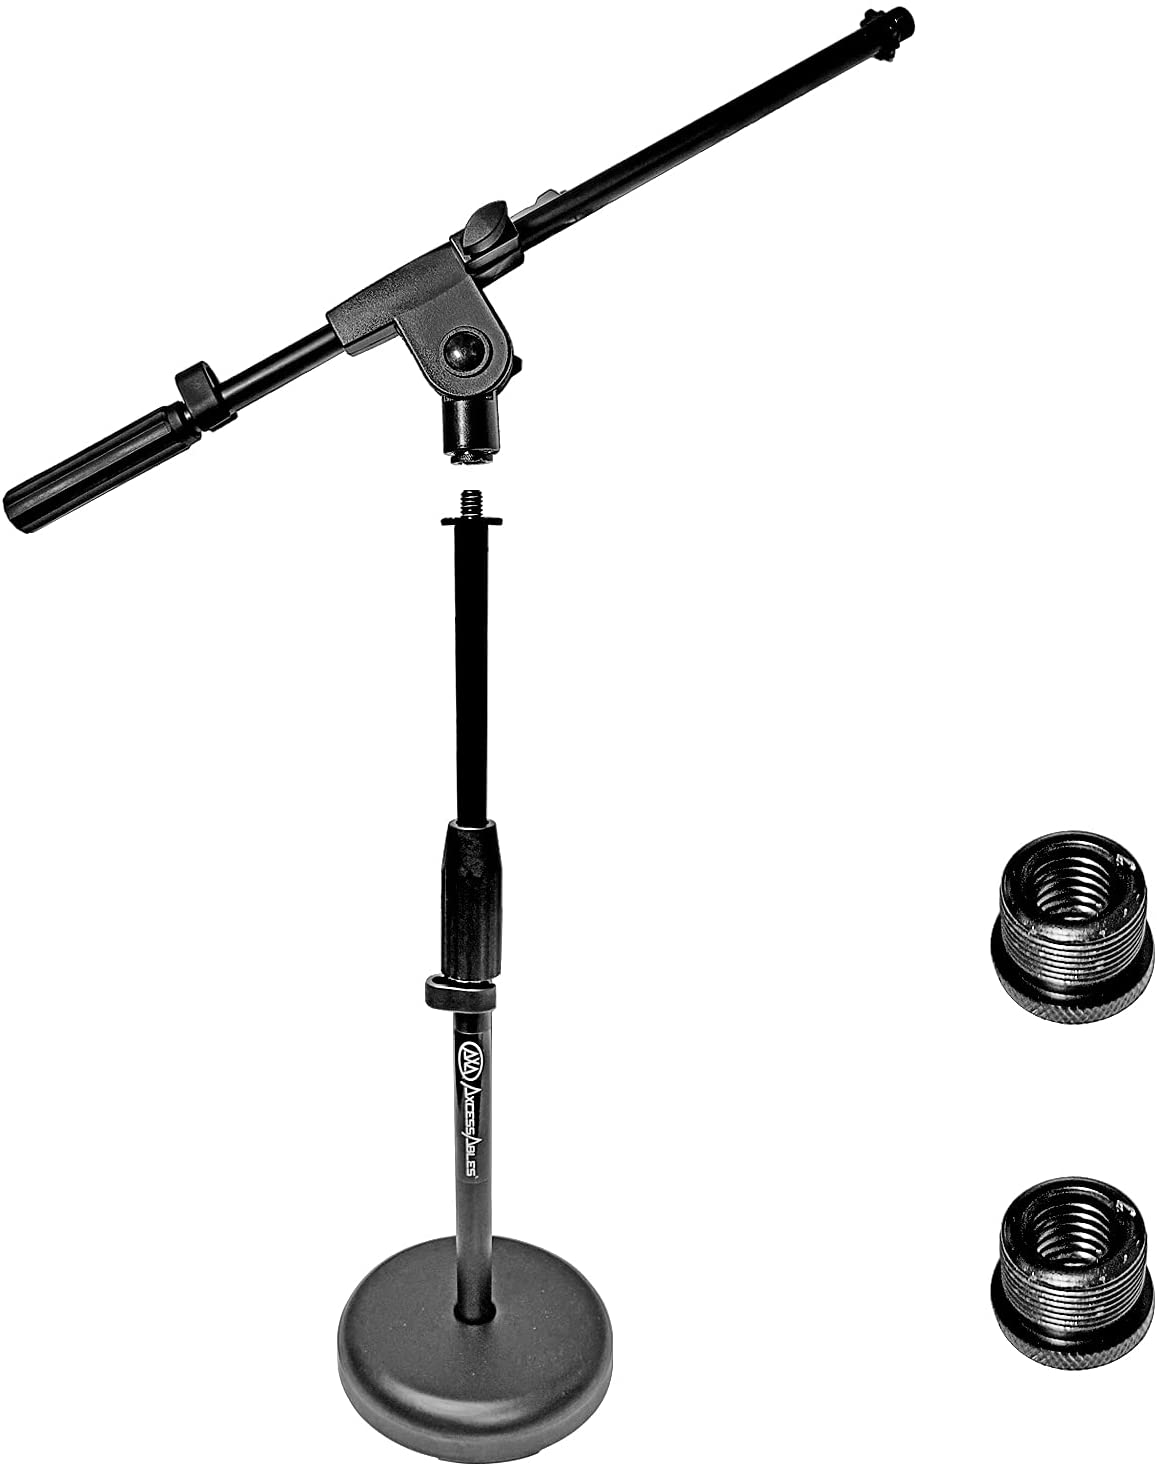 AxcessAbles MS-202R Low-Profile, Weighted Round Base Microphone Stand with Boom, Mic Clip and 3/8" to 5/8" Screw Adapter for Kick Drums, Guitar Amps, Blue Yeti and Blue Snowball